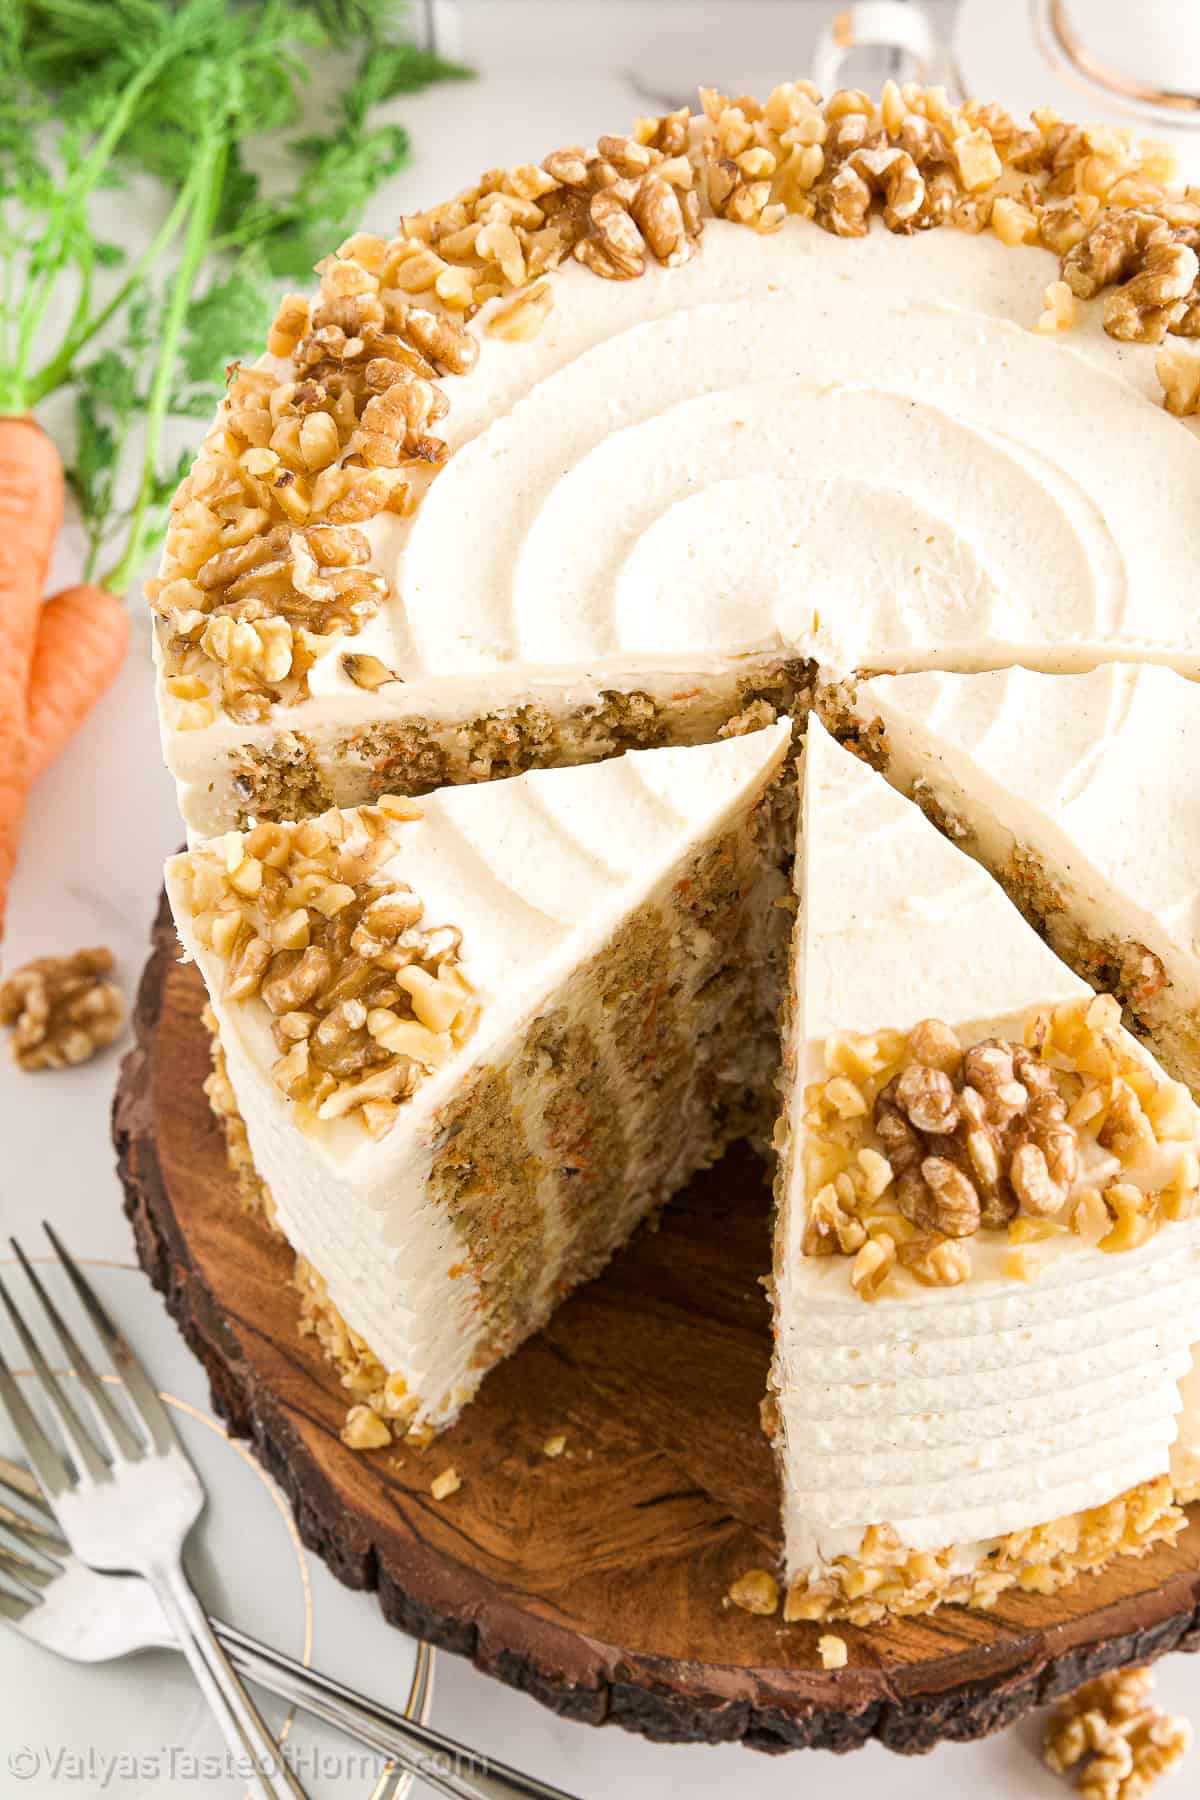 A carrot cake is a cake that contains grated carrots mixed into the batter, decorated using a white cream cheese frosting, and sprinkle with chopped nuts.